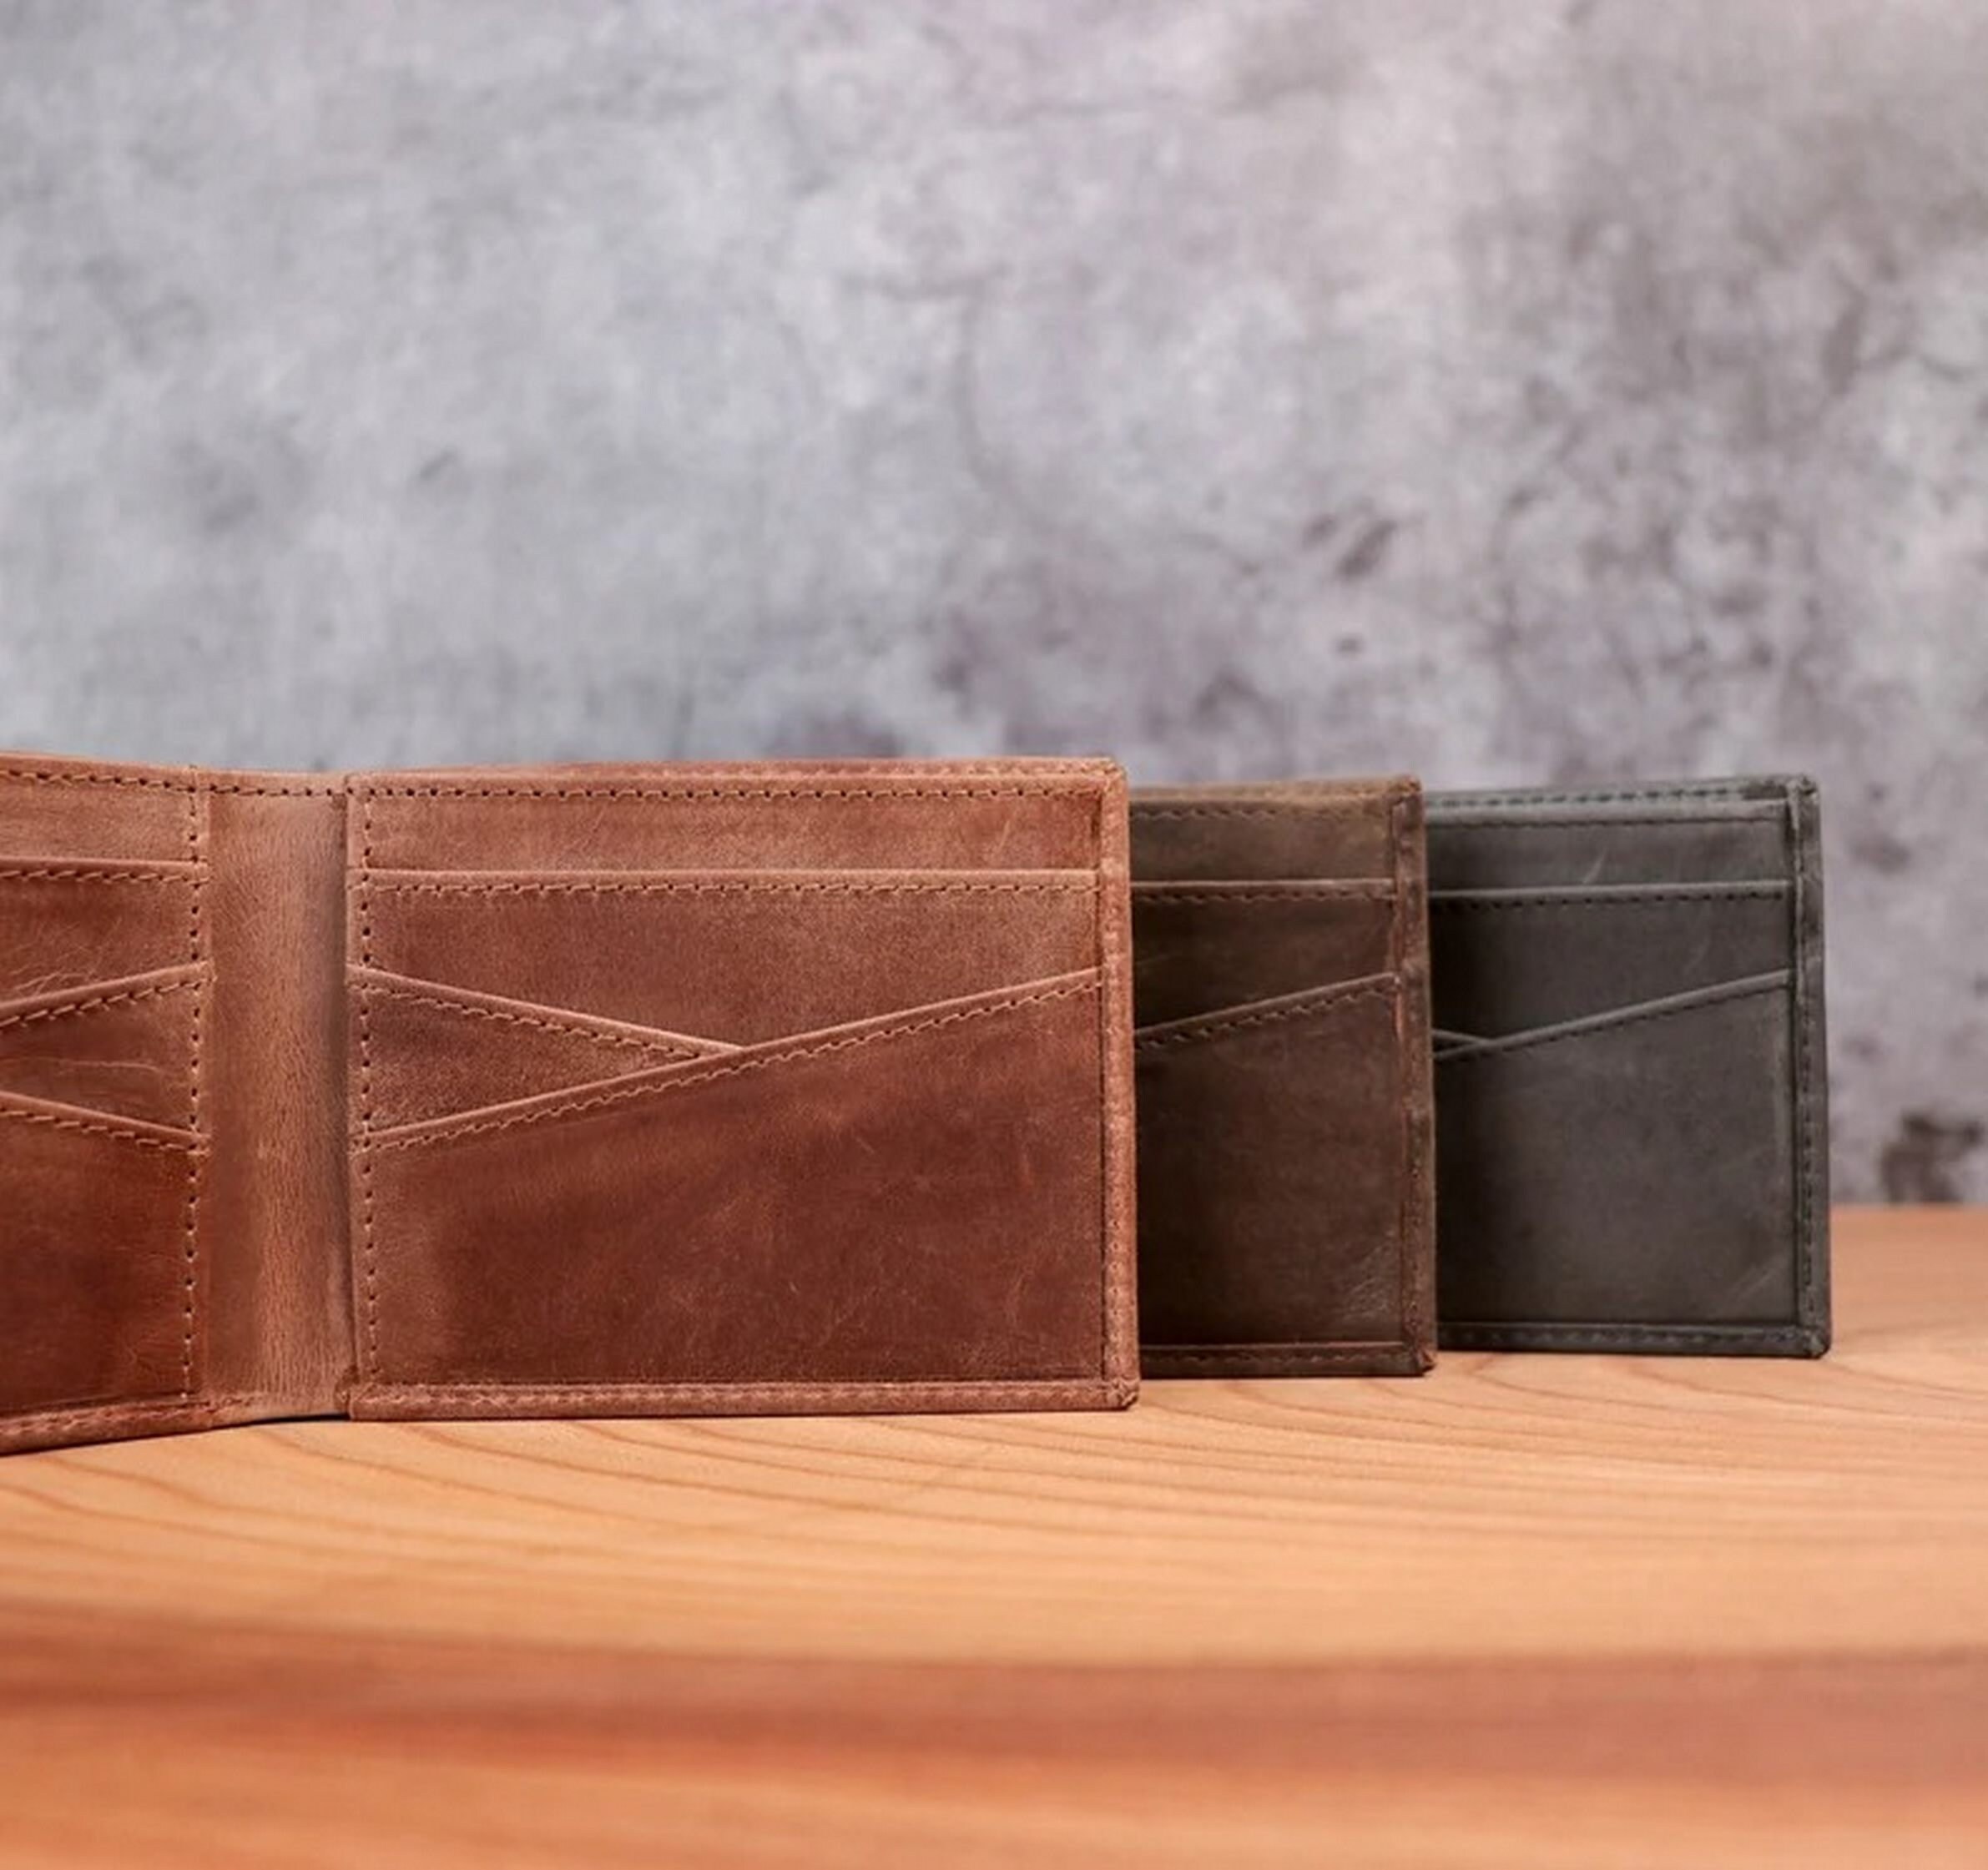 Men's Leather Wallet in Whisky Brown Boxcalf and Blue Deerskin with 10 Card Slots by Fort Belvedere